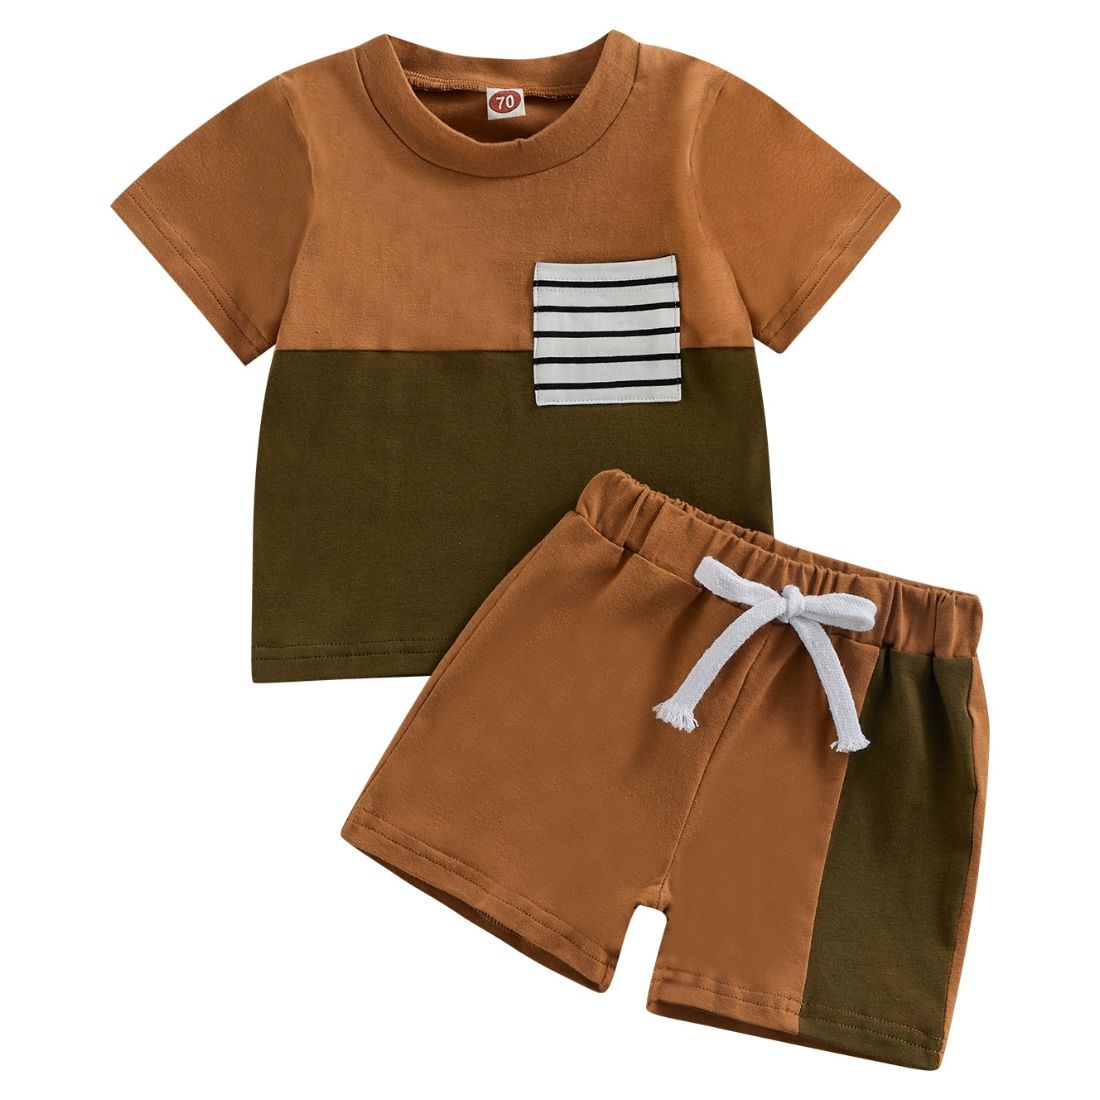 Toddler Boy Colour Block Pocket Tee Set - My Trendy Youngsters | Buy Trendy and Afforable Baby and Toddler Clothing Sets @ My Trendy Youngsters - Dress your little man in Style @ My Trendy Youngsters 